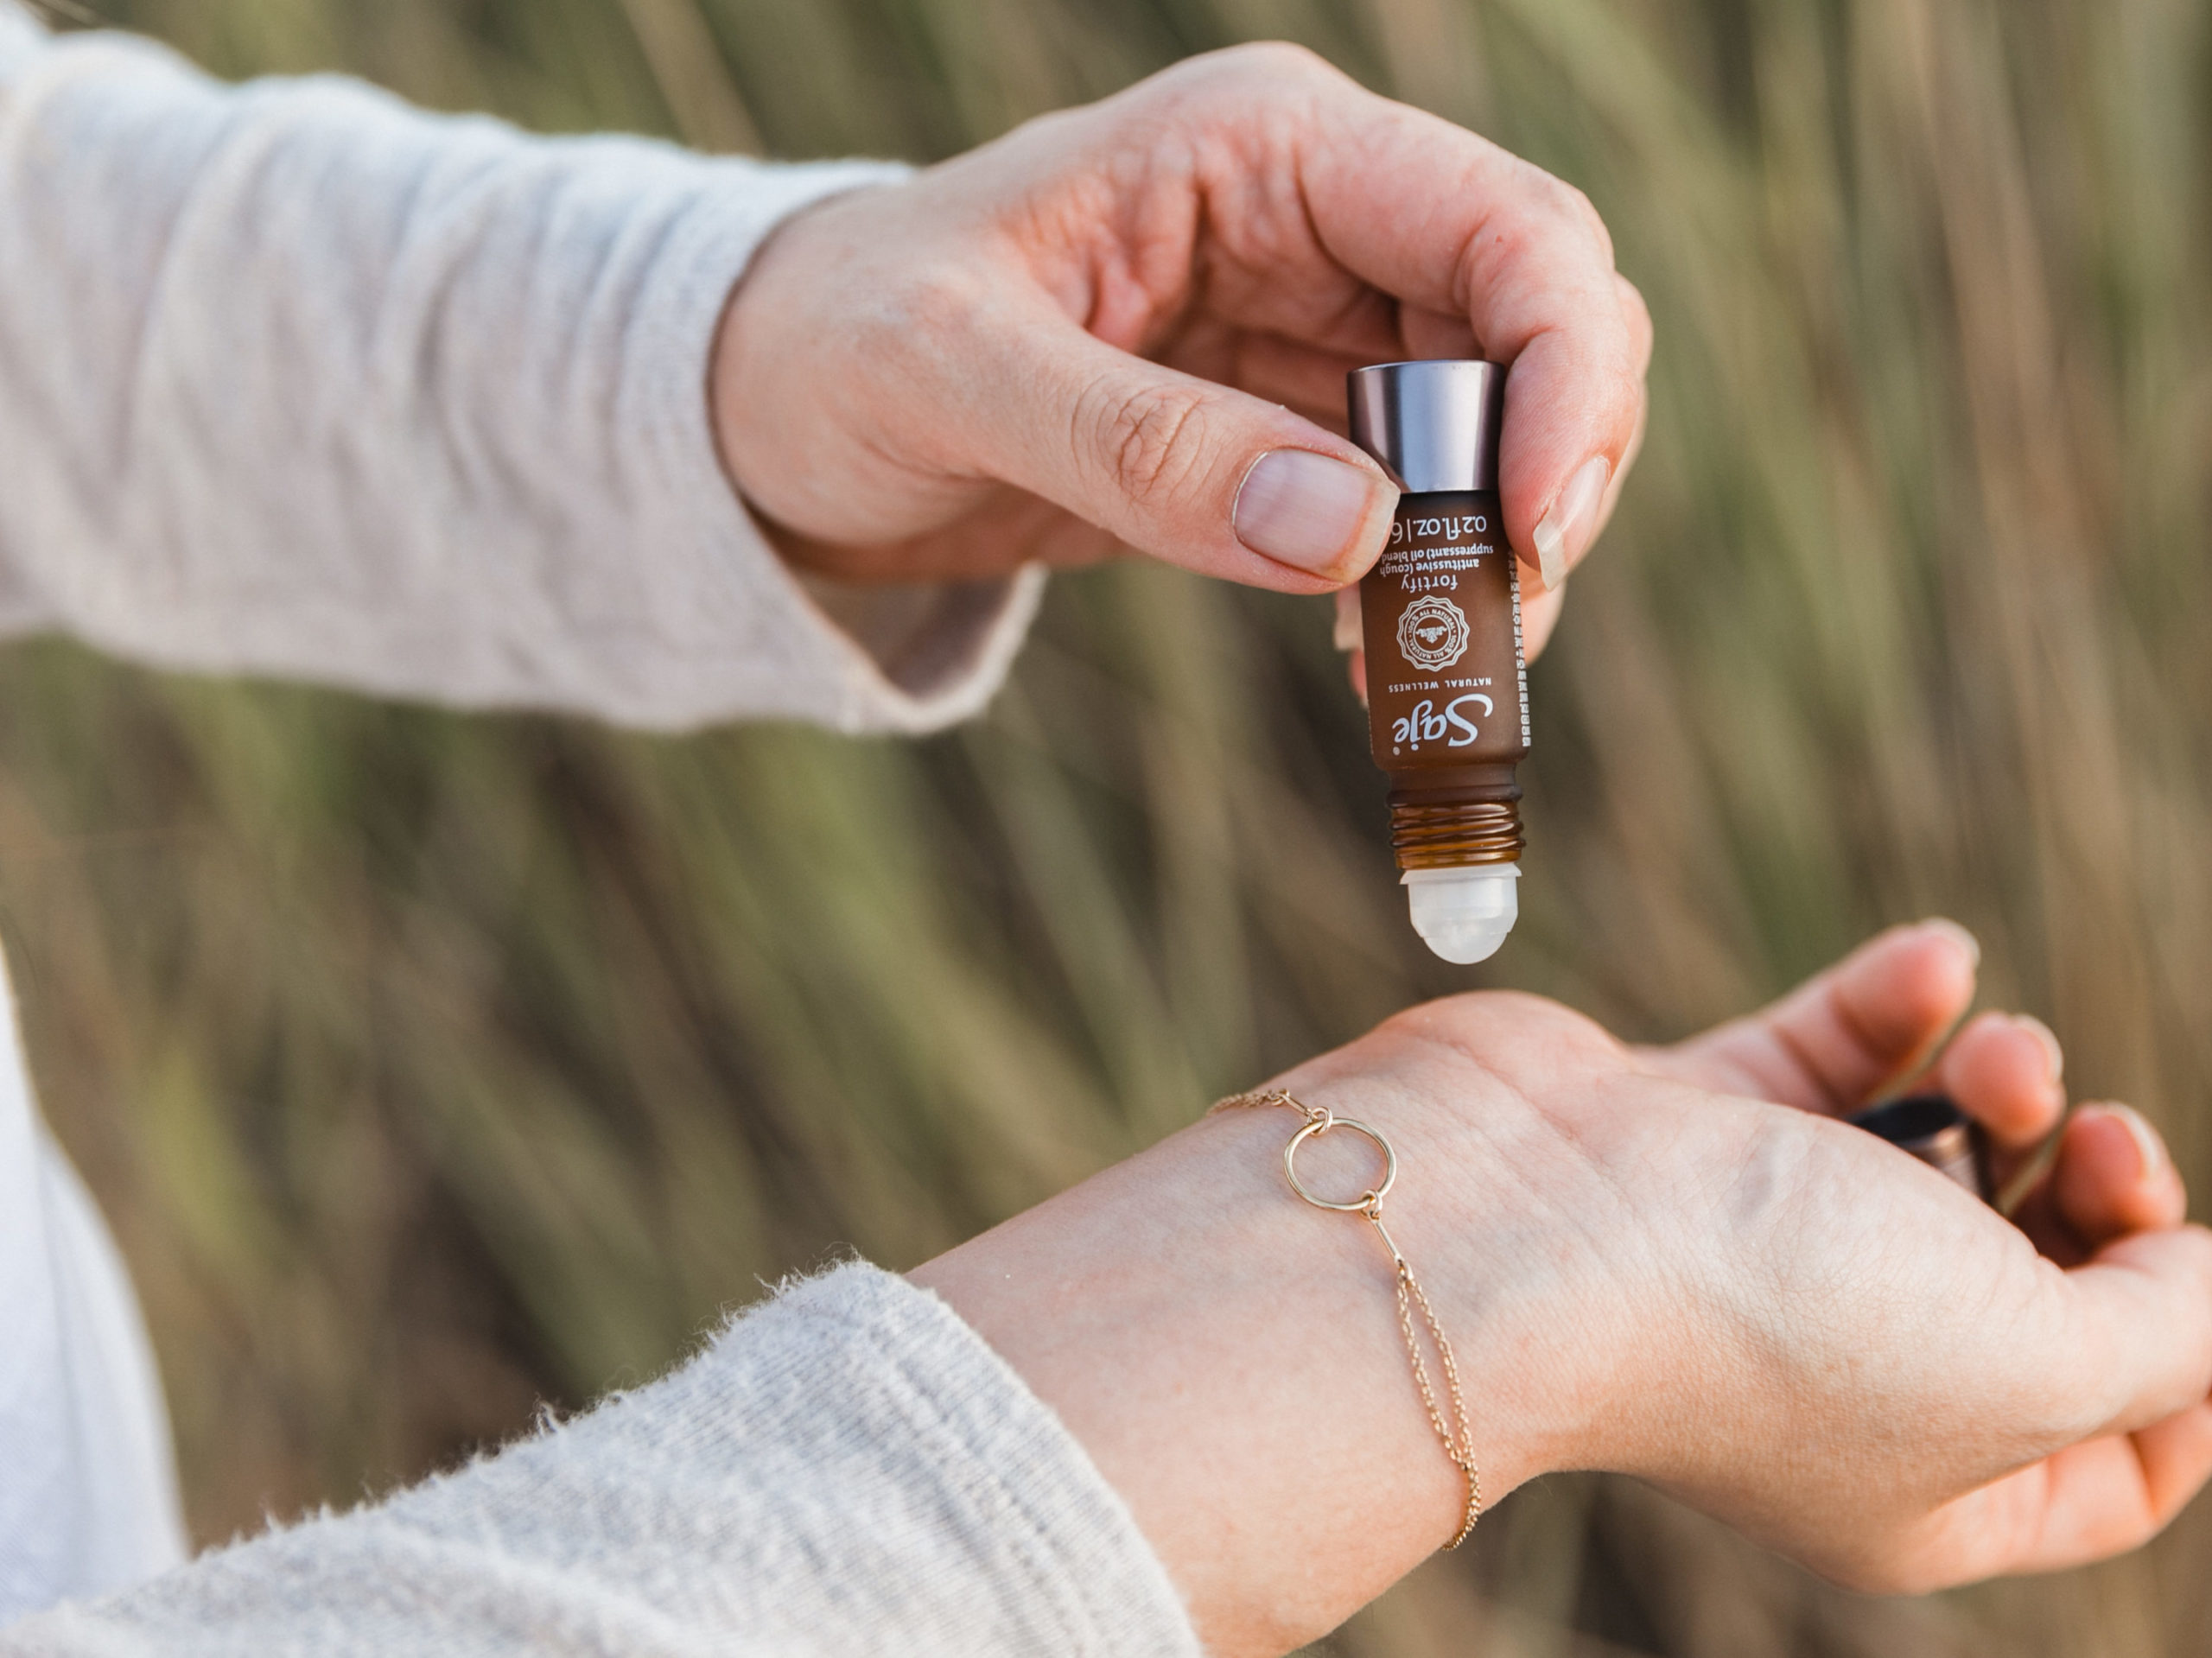 Using an essential oil blend roll-on can really help ease anxiety and calm your nerves especially when on the road and traveling. It's a quick way to create a home away from home energy with familiar scents. #TheDimpleLife #EssentialOils #HomeRemedy